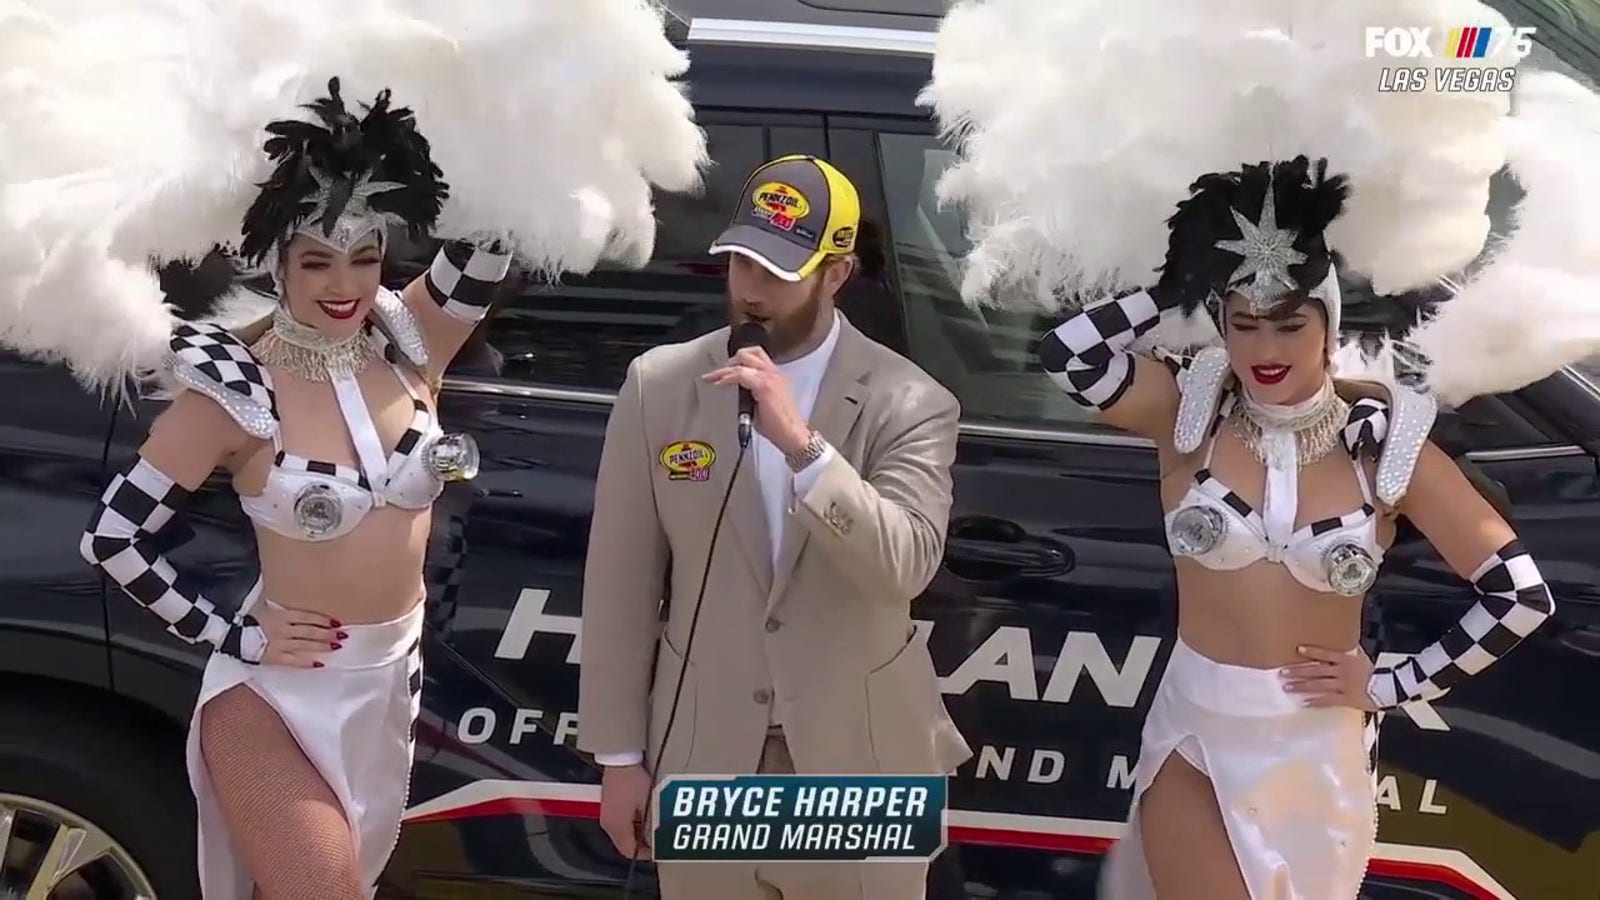 Bryce Harper tells drivers to start their engines at the Pennzoil 400